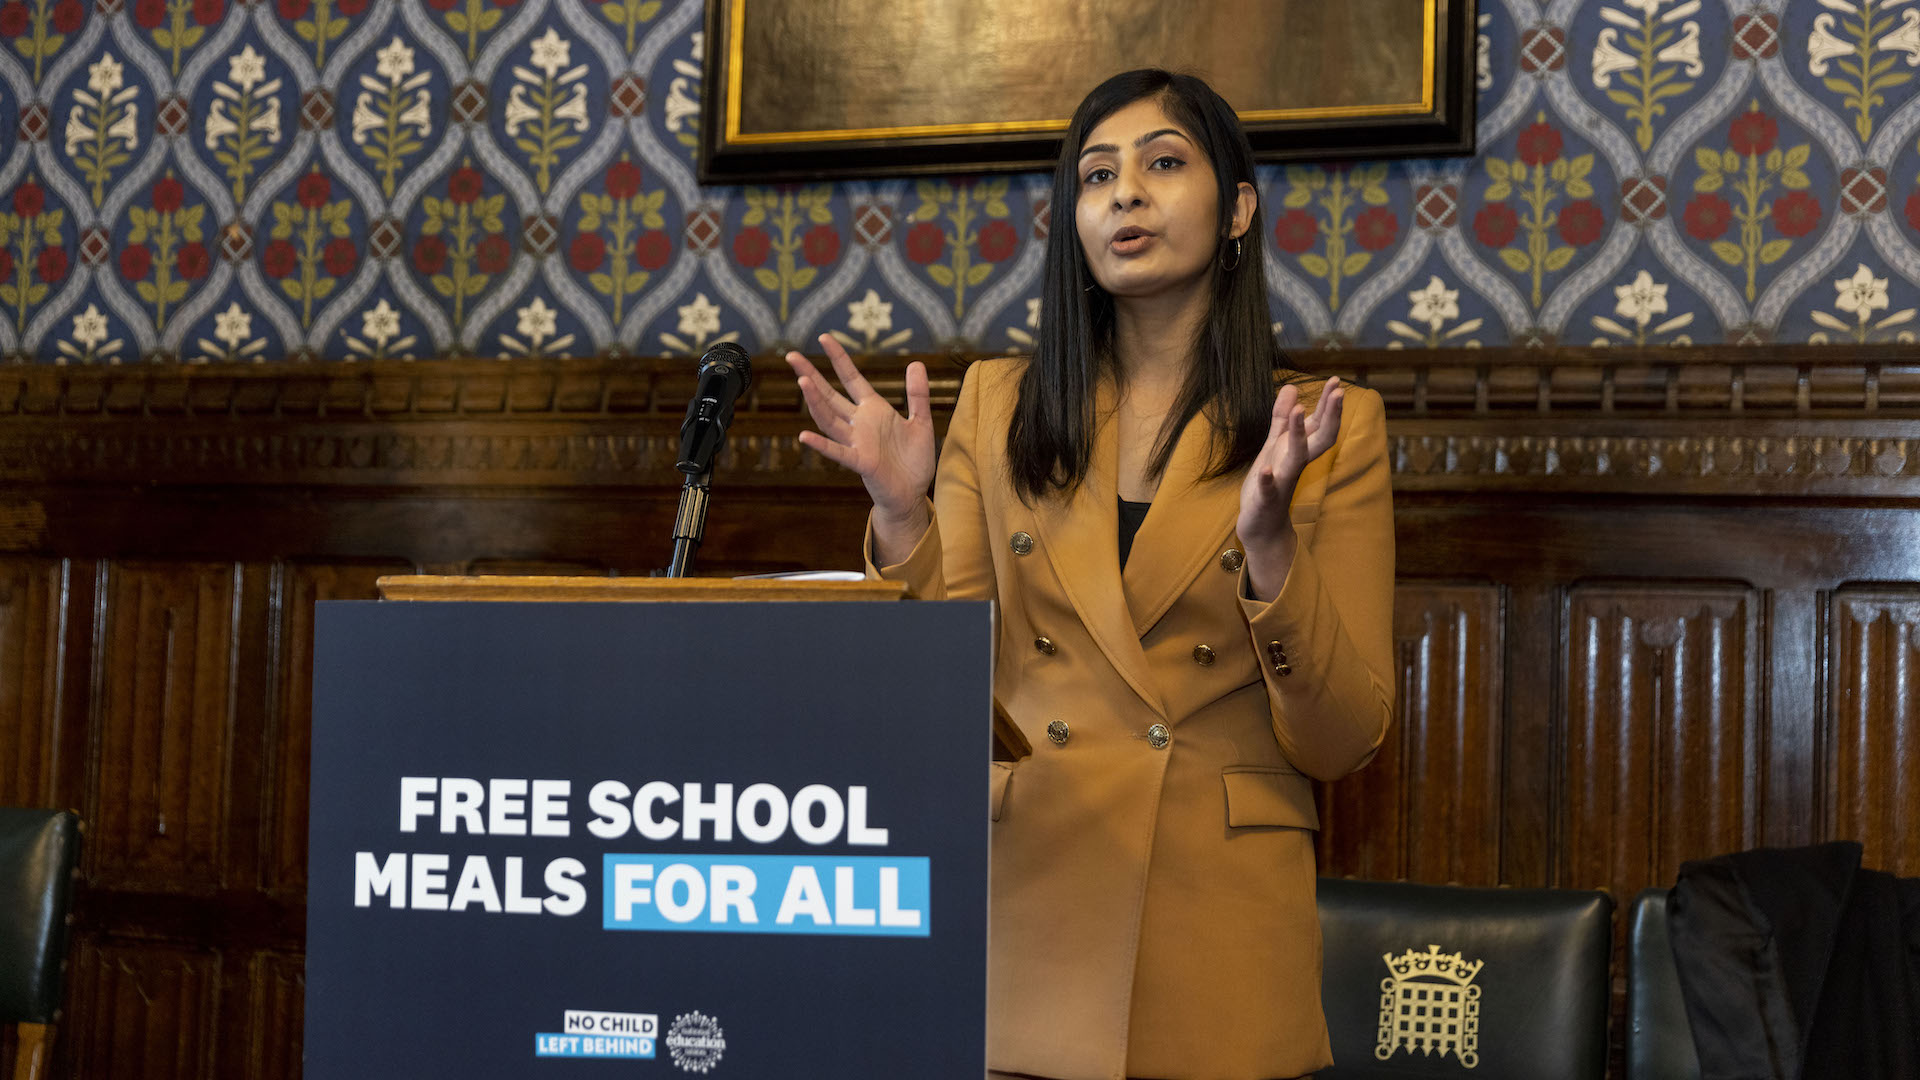 Zarah Sultana gives a speech standing behind a lectern with "free school meals for all" on it